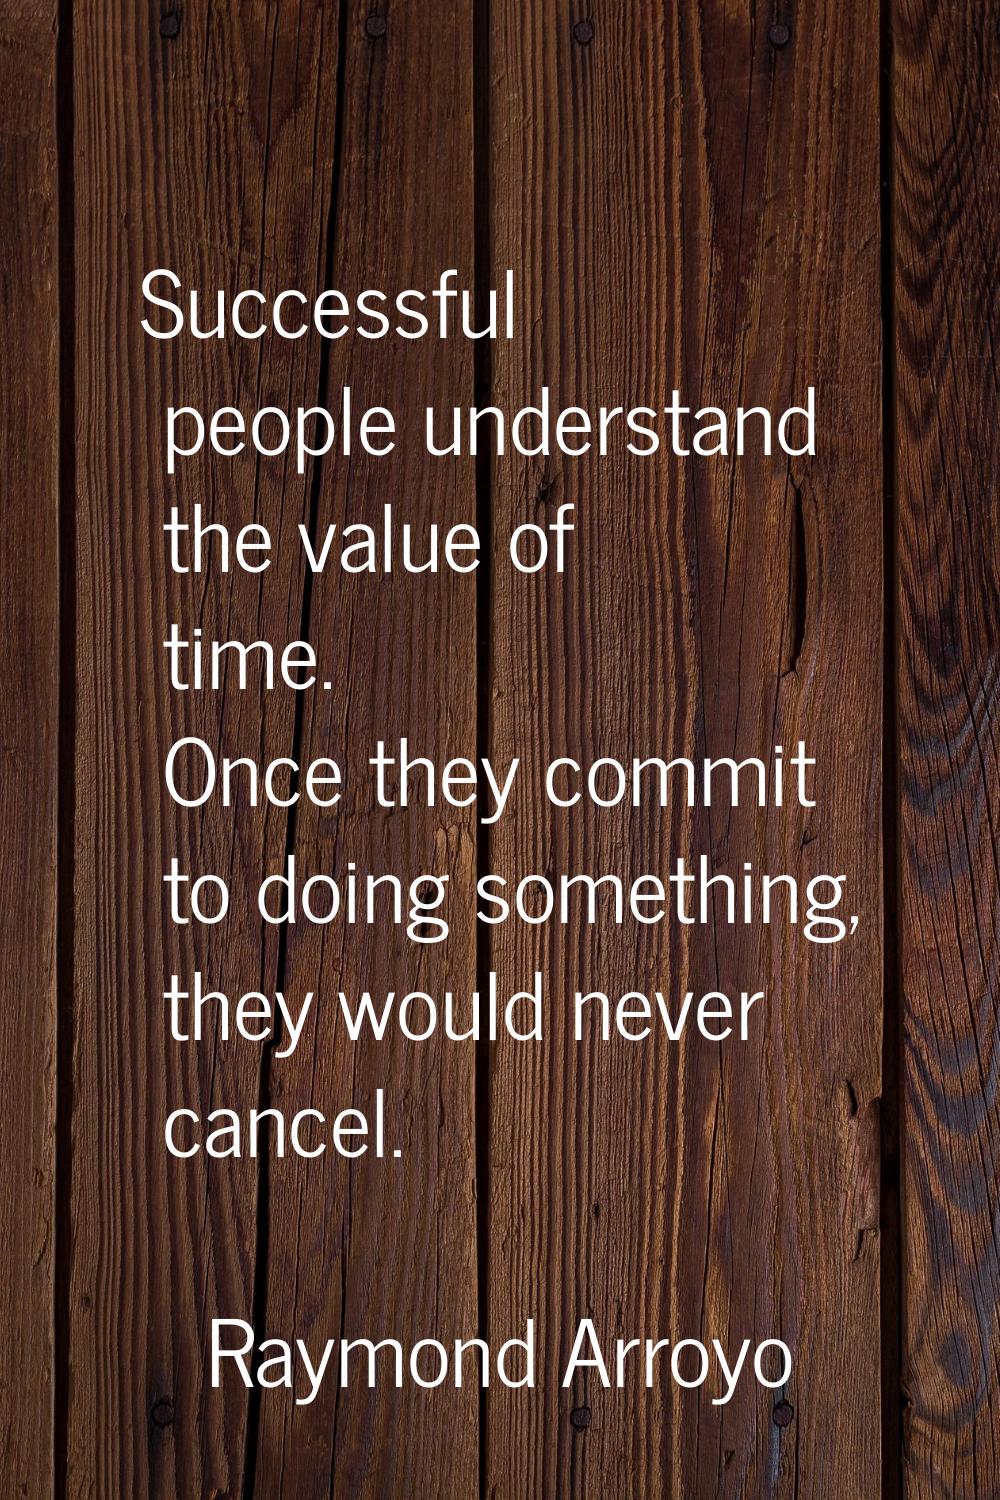 Successful people understand the value of time. Once they commit to doing something, they would nev